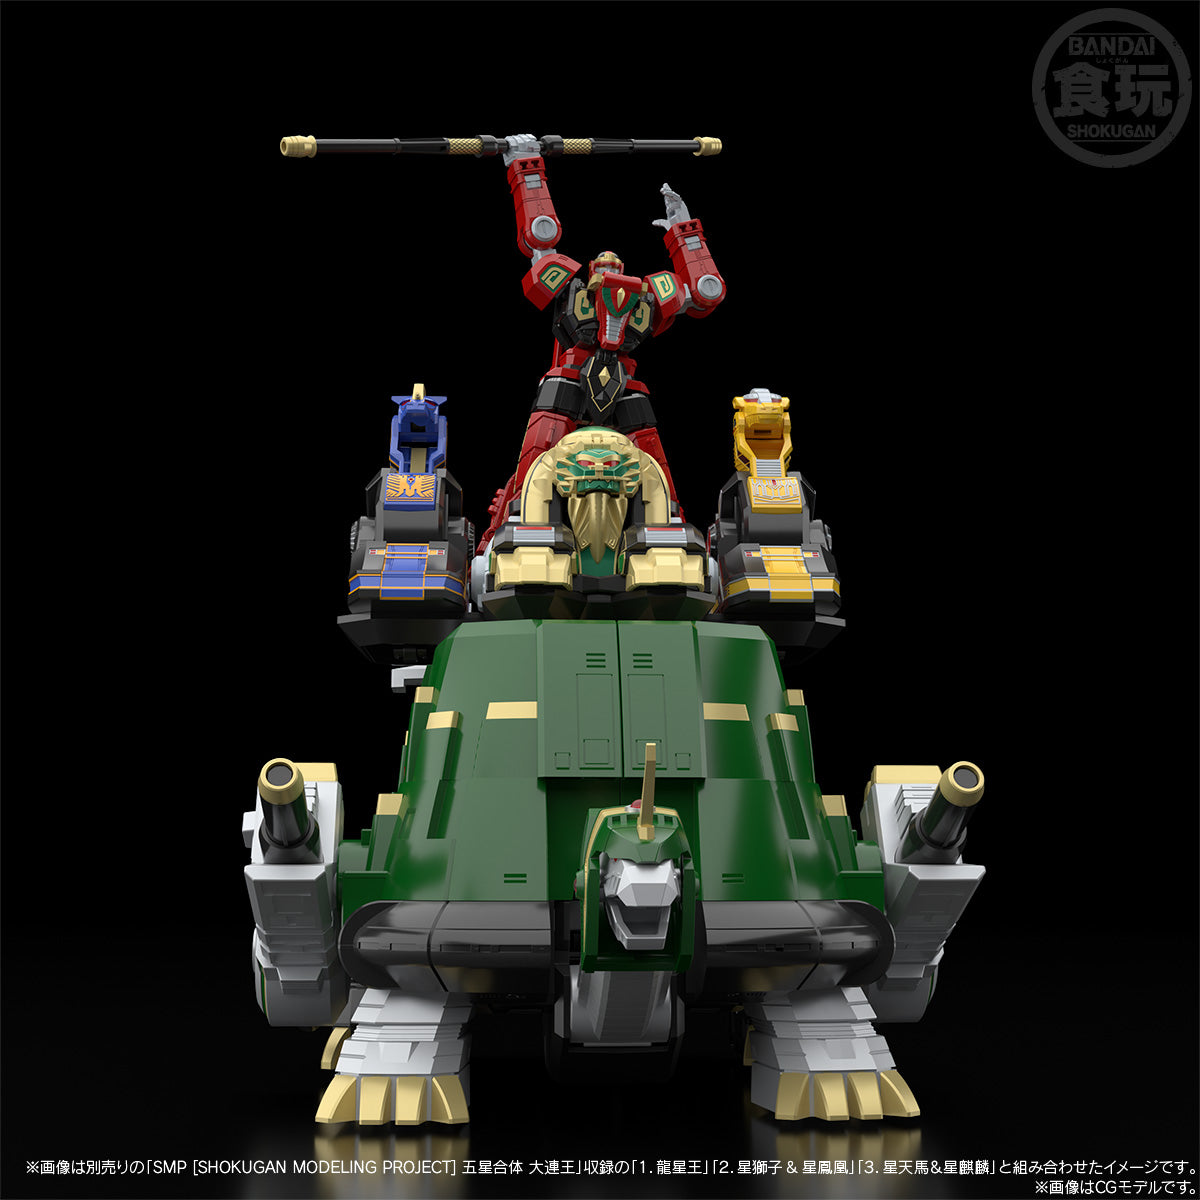 [IN STOCK in HK] SMP Shokugan Modeling Project Super Sentai Super Mythical QI Beast Daimugen